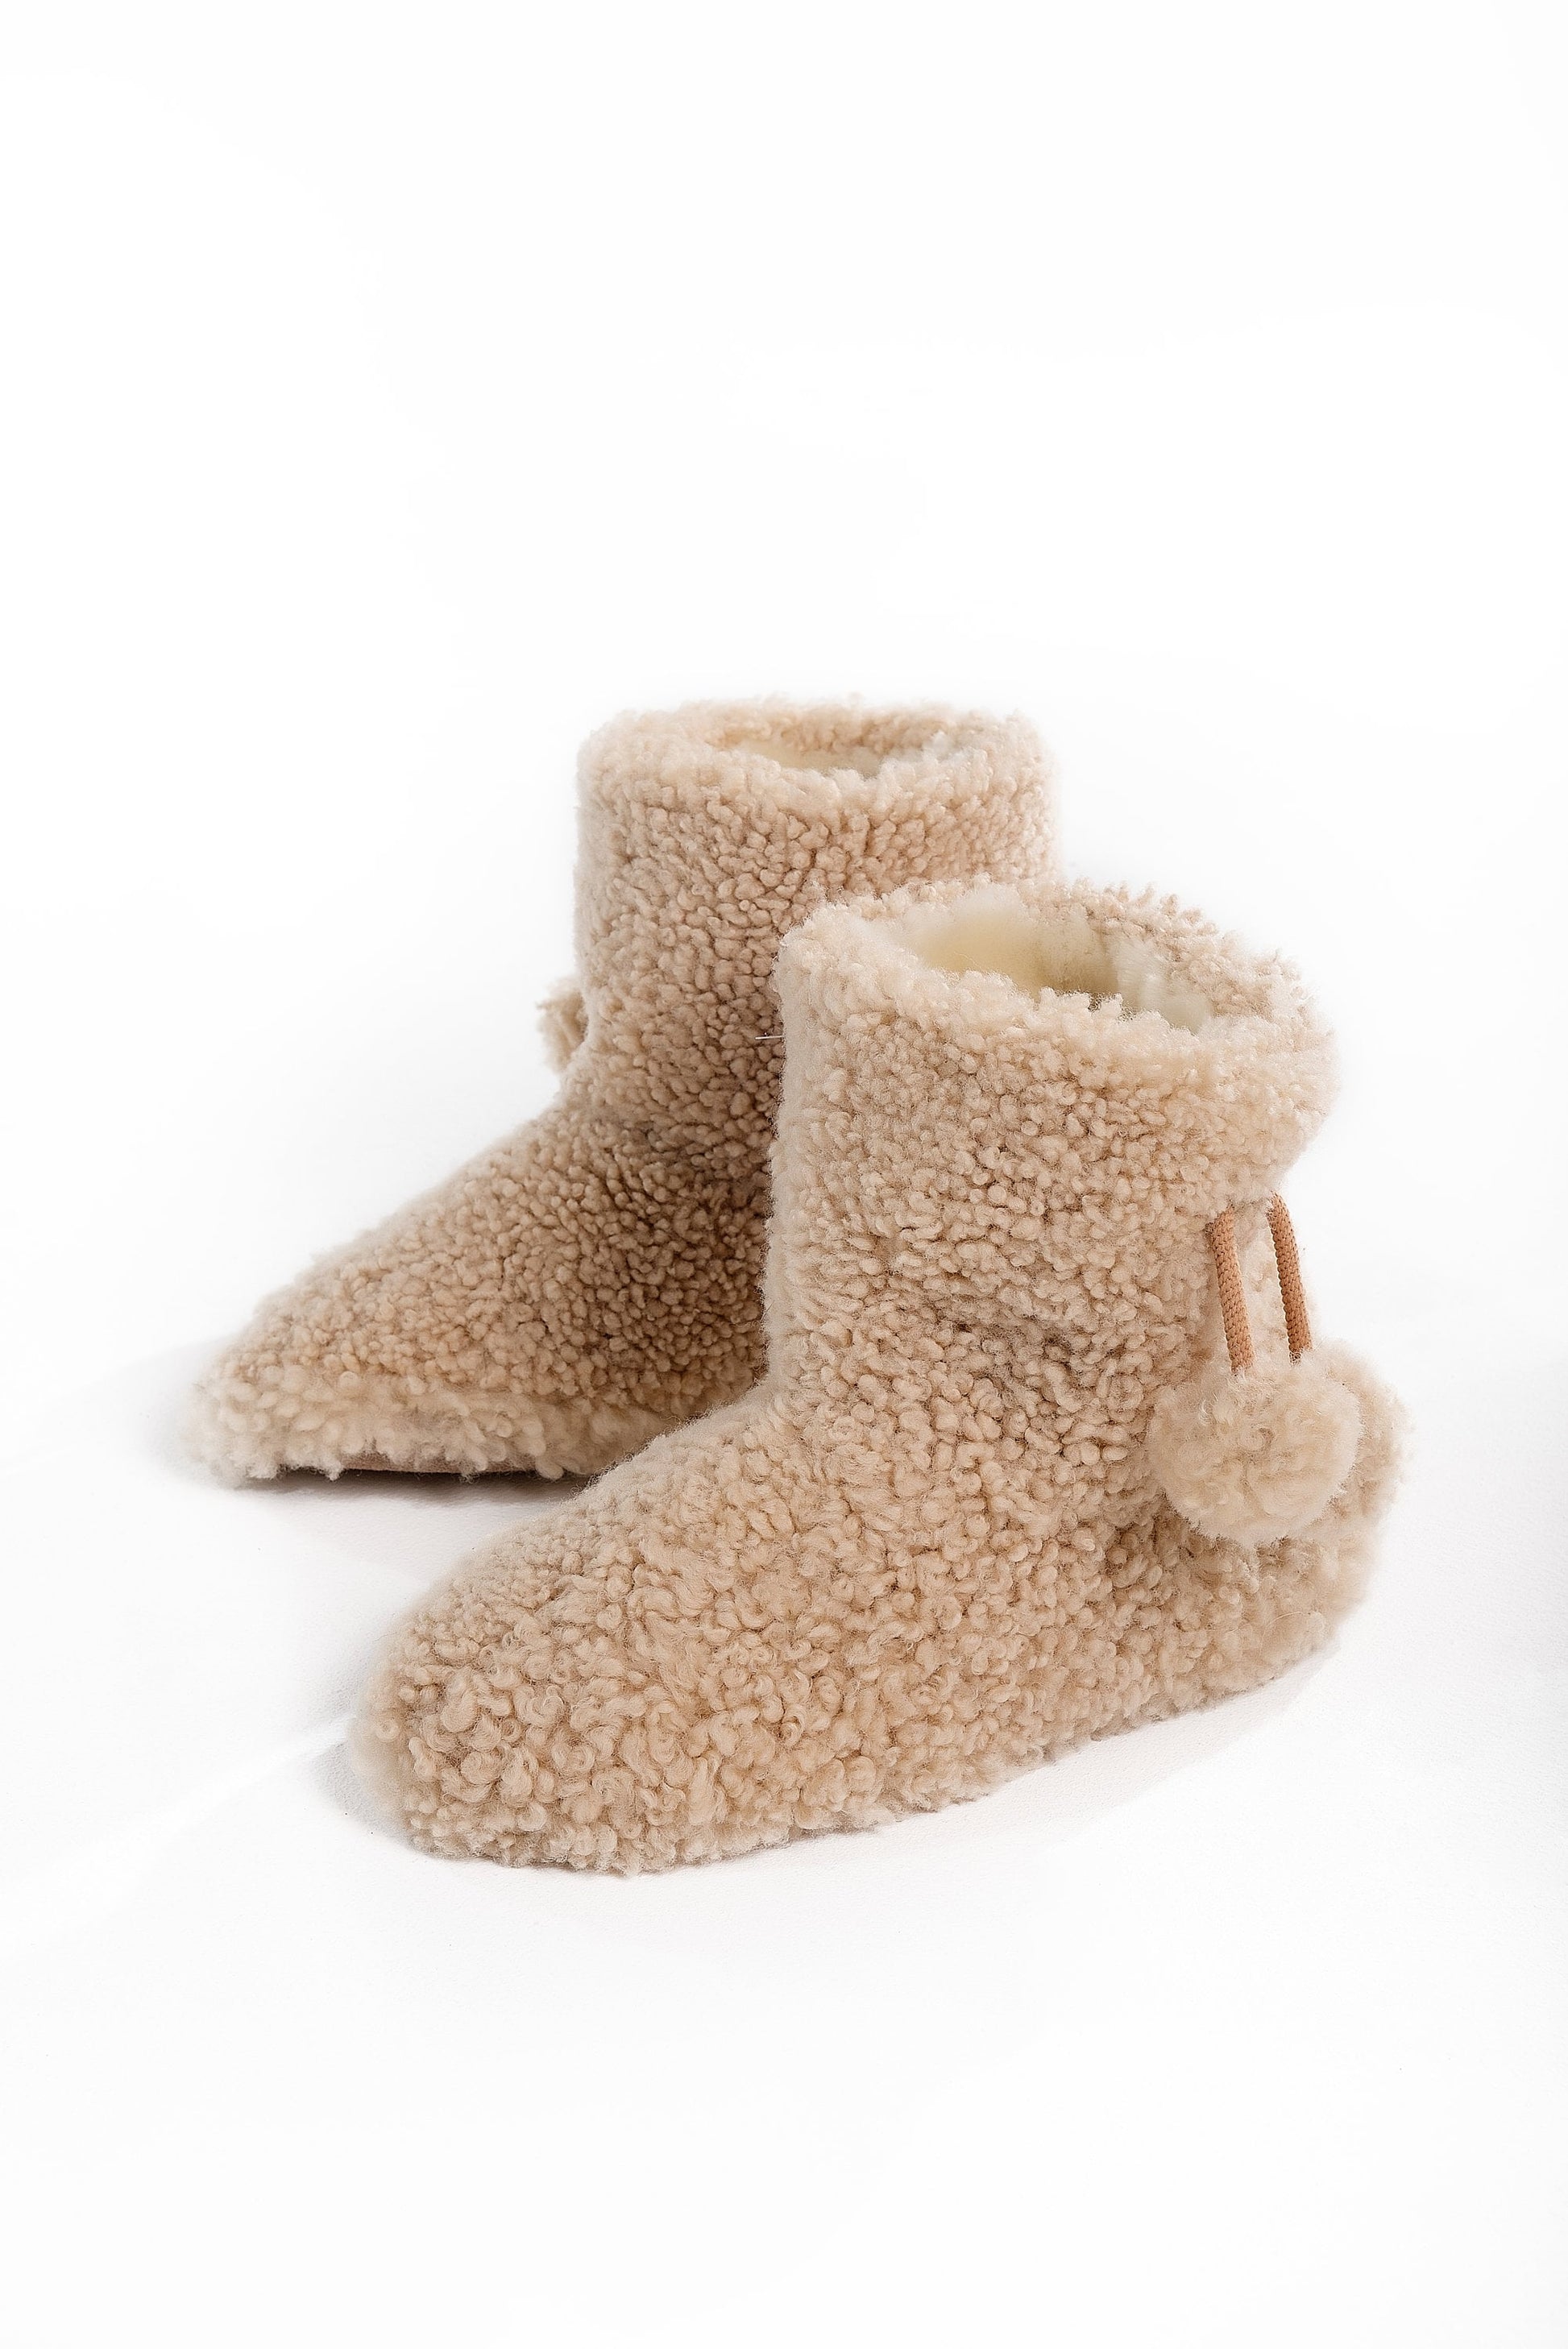 Real Womens Boucle Sheepskin Slipper Home Boots in Beige Color With Pom Pom